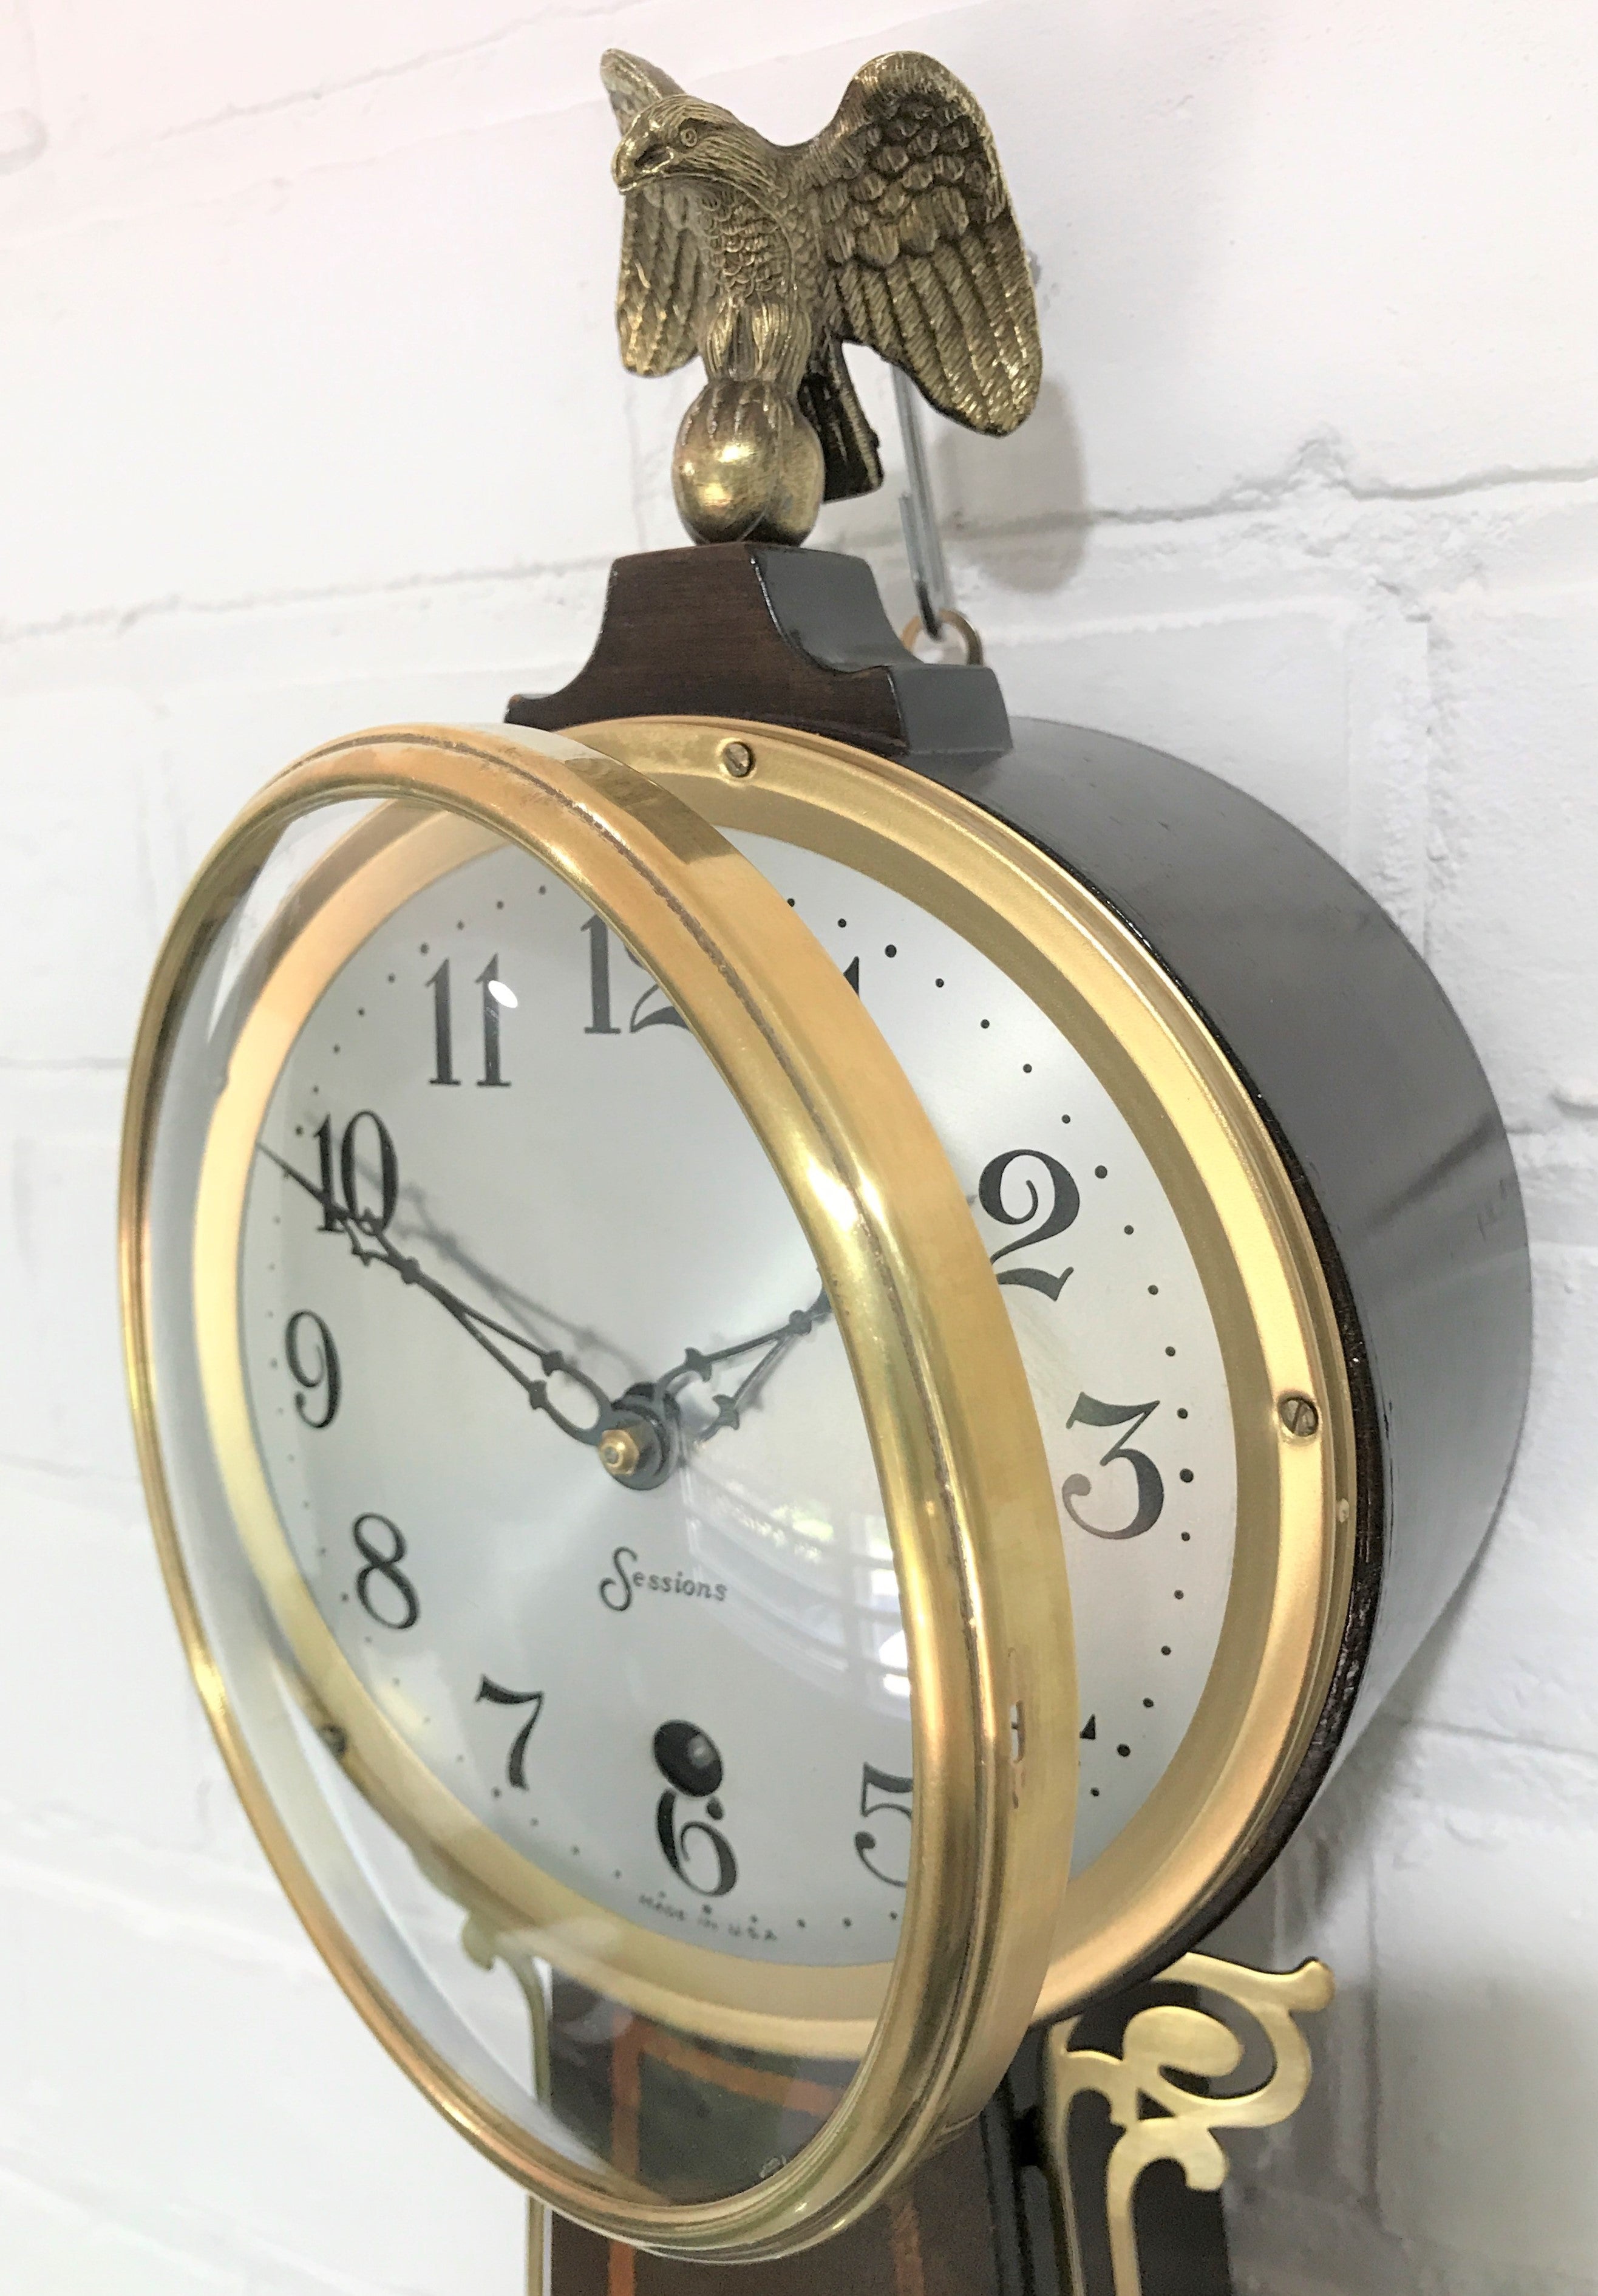 Antique Sessions Banjo Wall Clock | eXibit collection